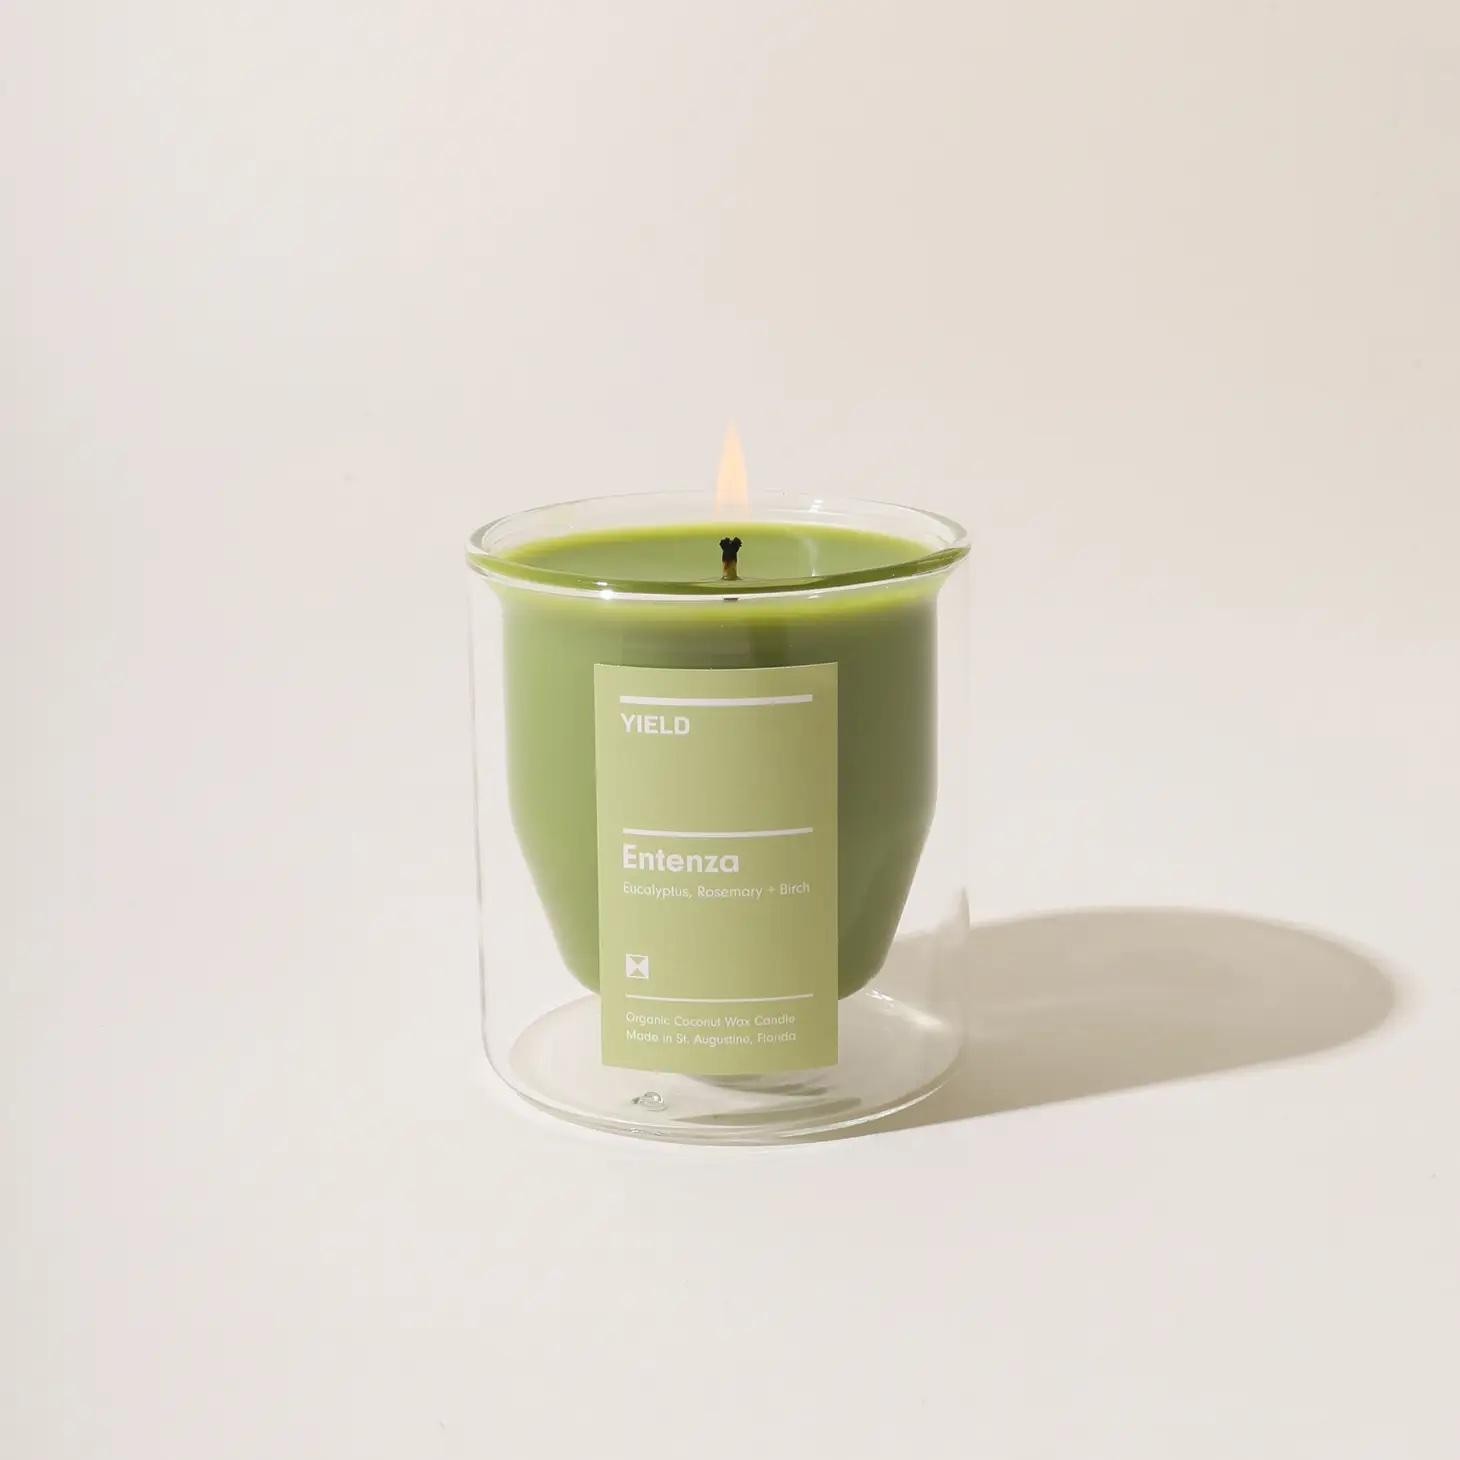 YIE Entenza double-wall candle